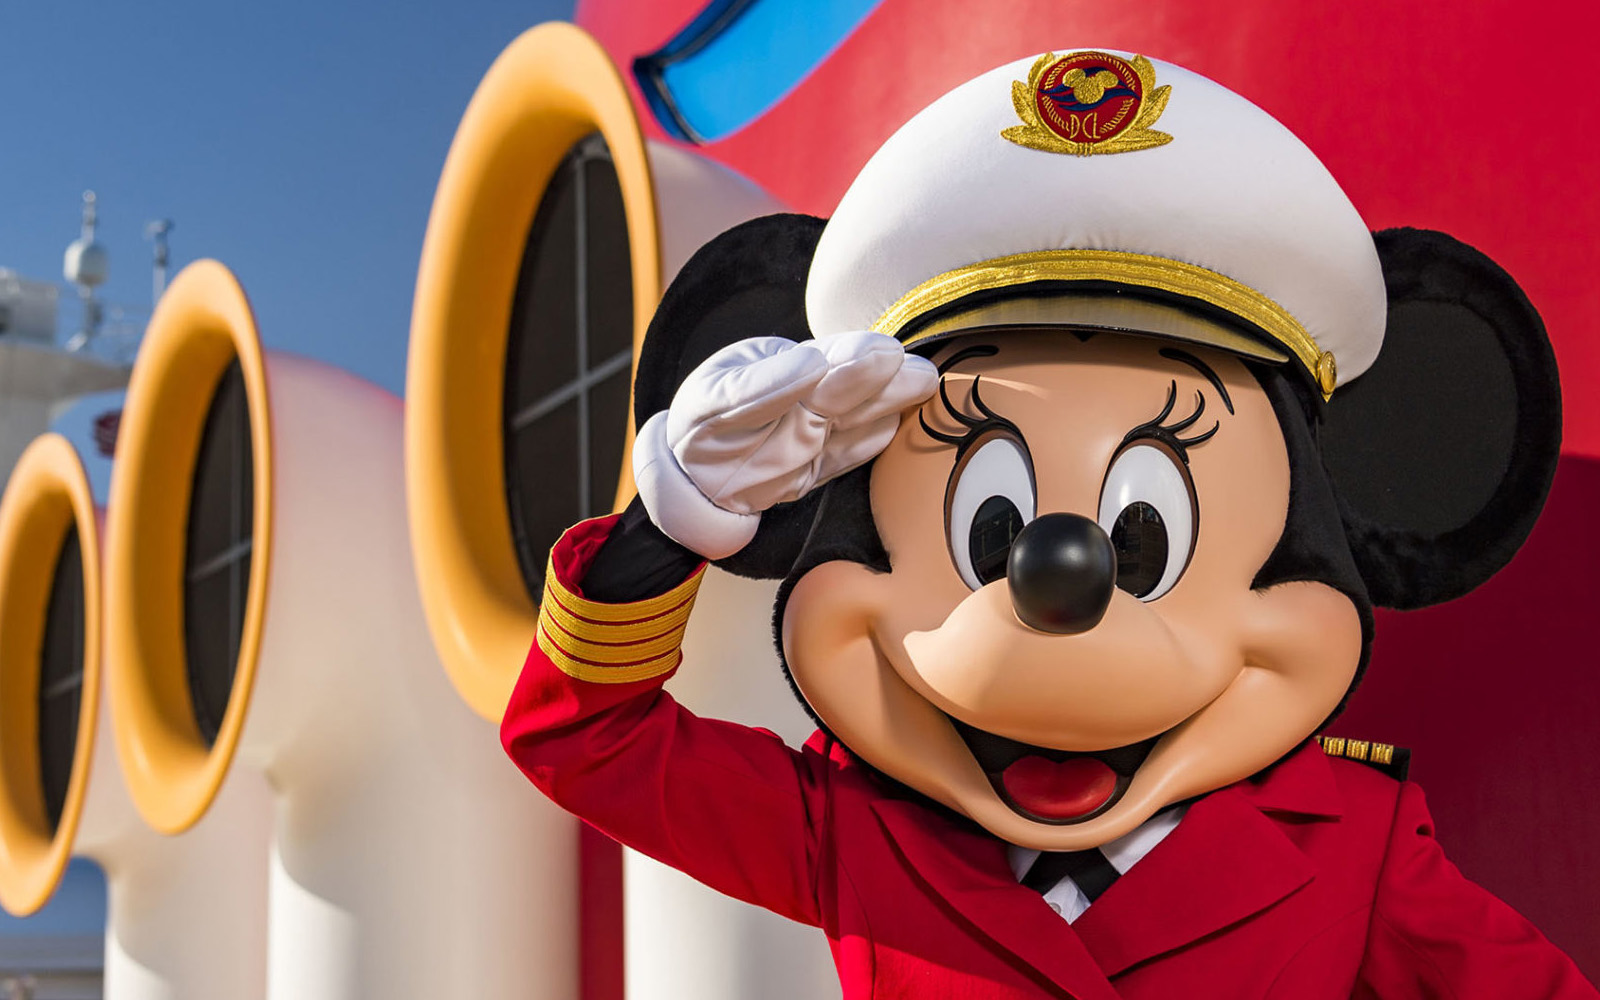 Captain Minnie saluting in front of funnel on Disney Cruise Line ship (source: Disney Cruise Line)